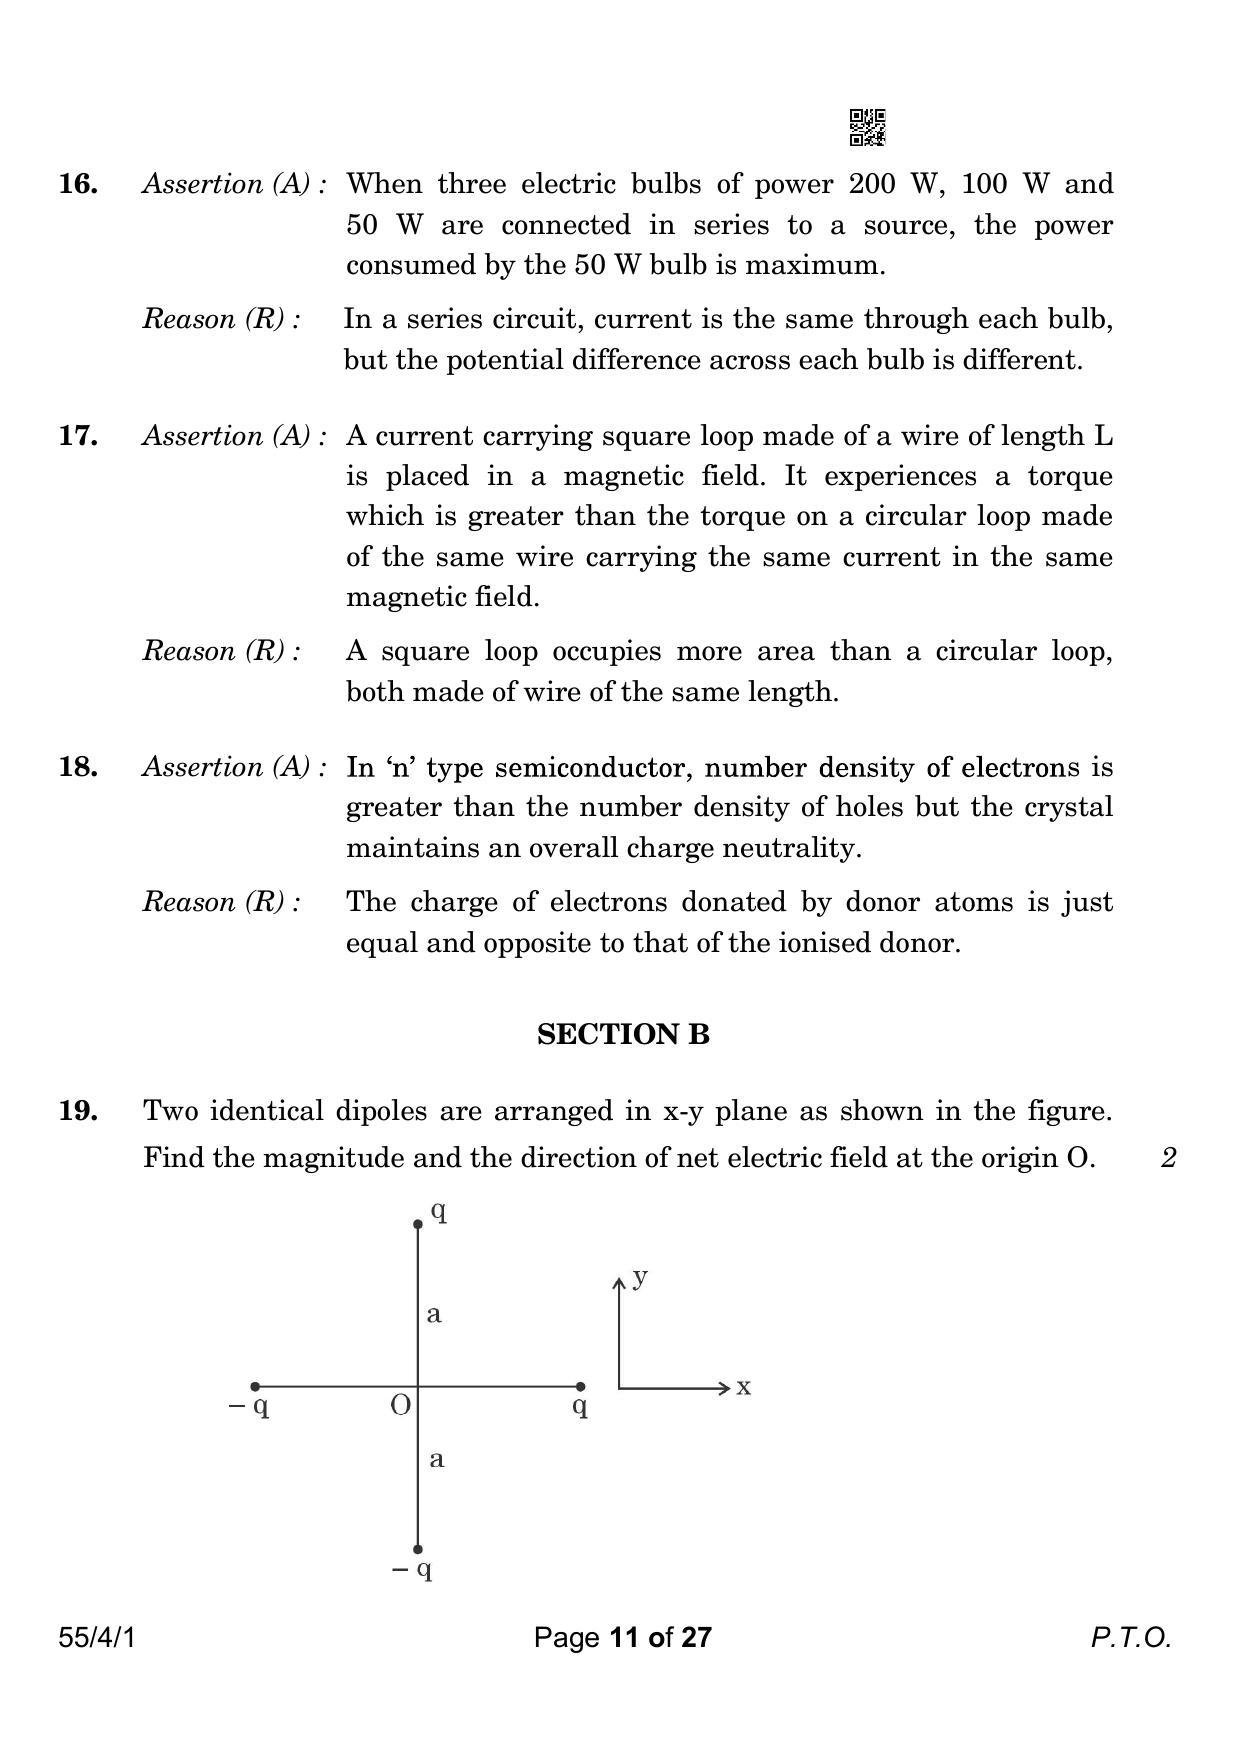 CBSE Class 12 55-4-1 Physics 2023 Question Paper - Page 11